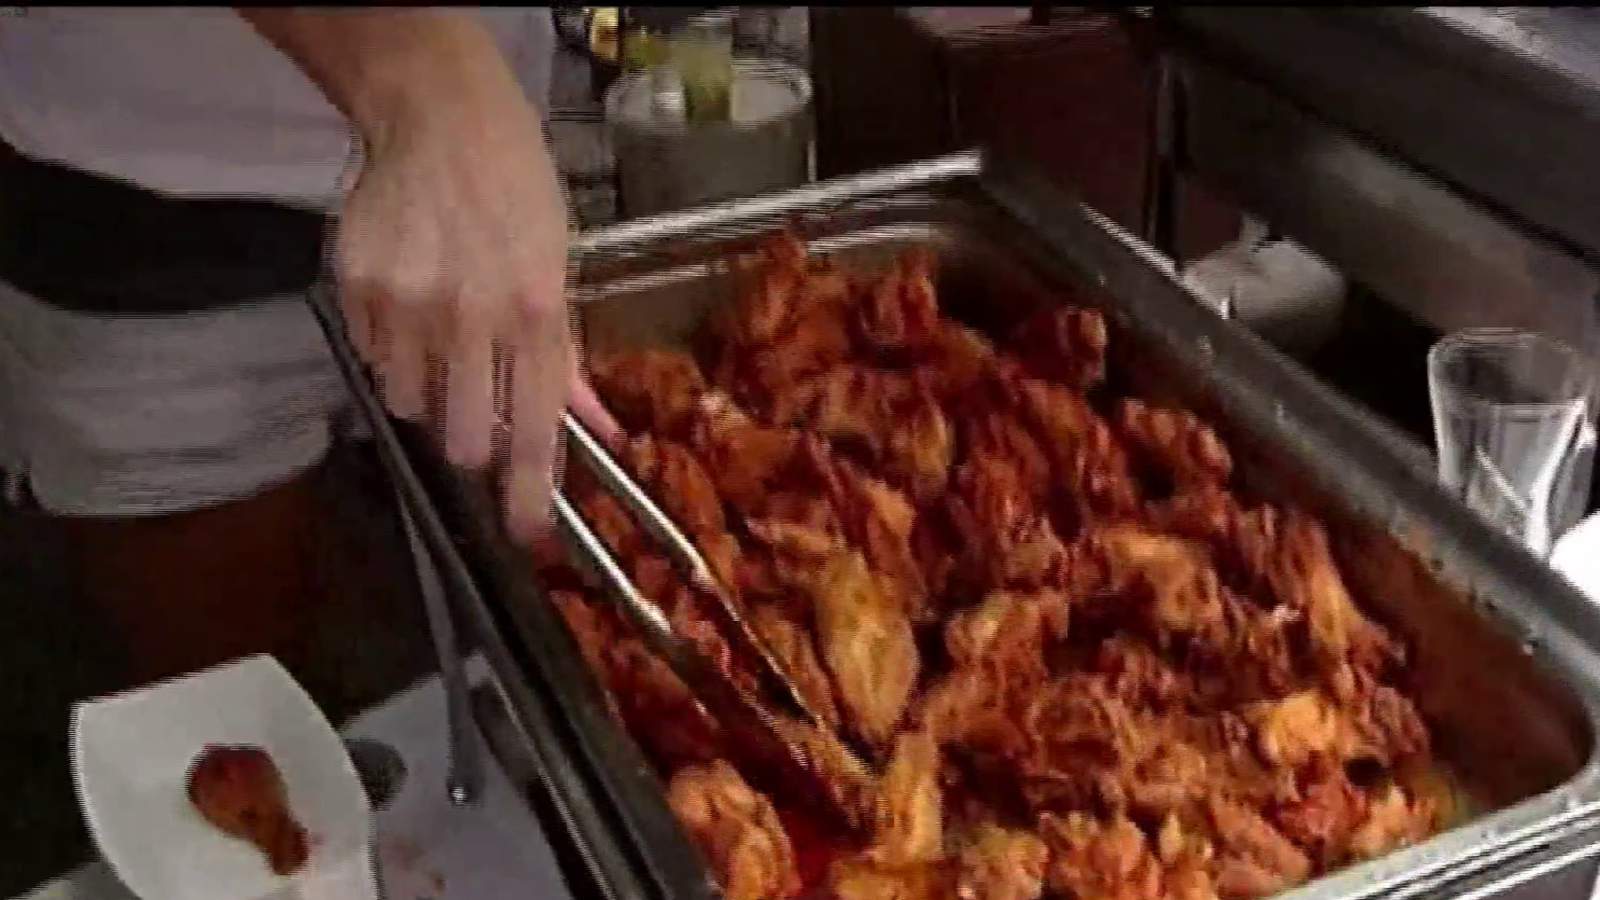 Chow down on wings while keeping your distance at Roanoke Wing Fest Saturday